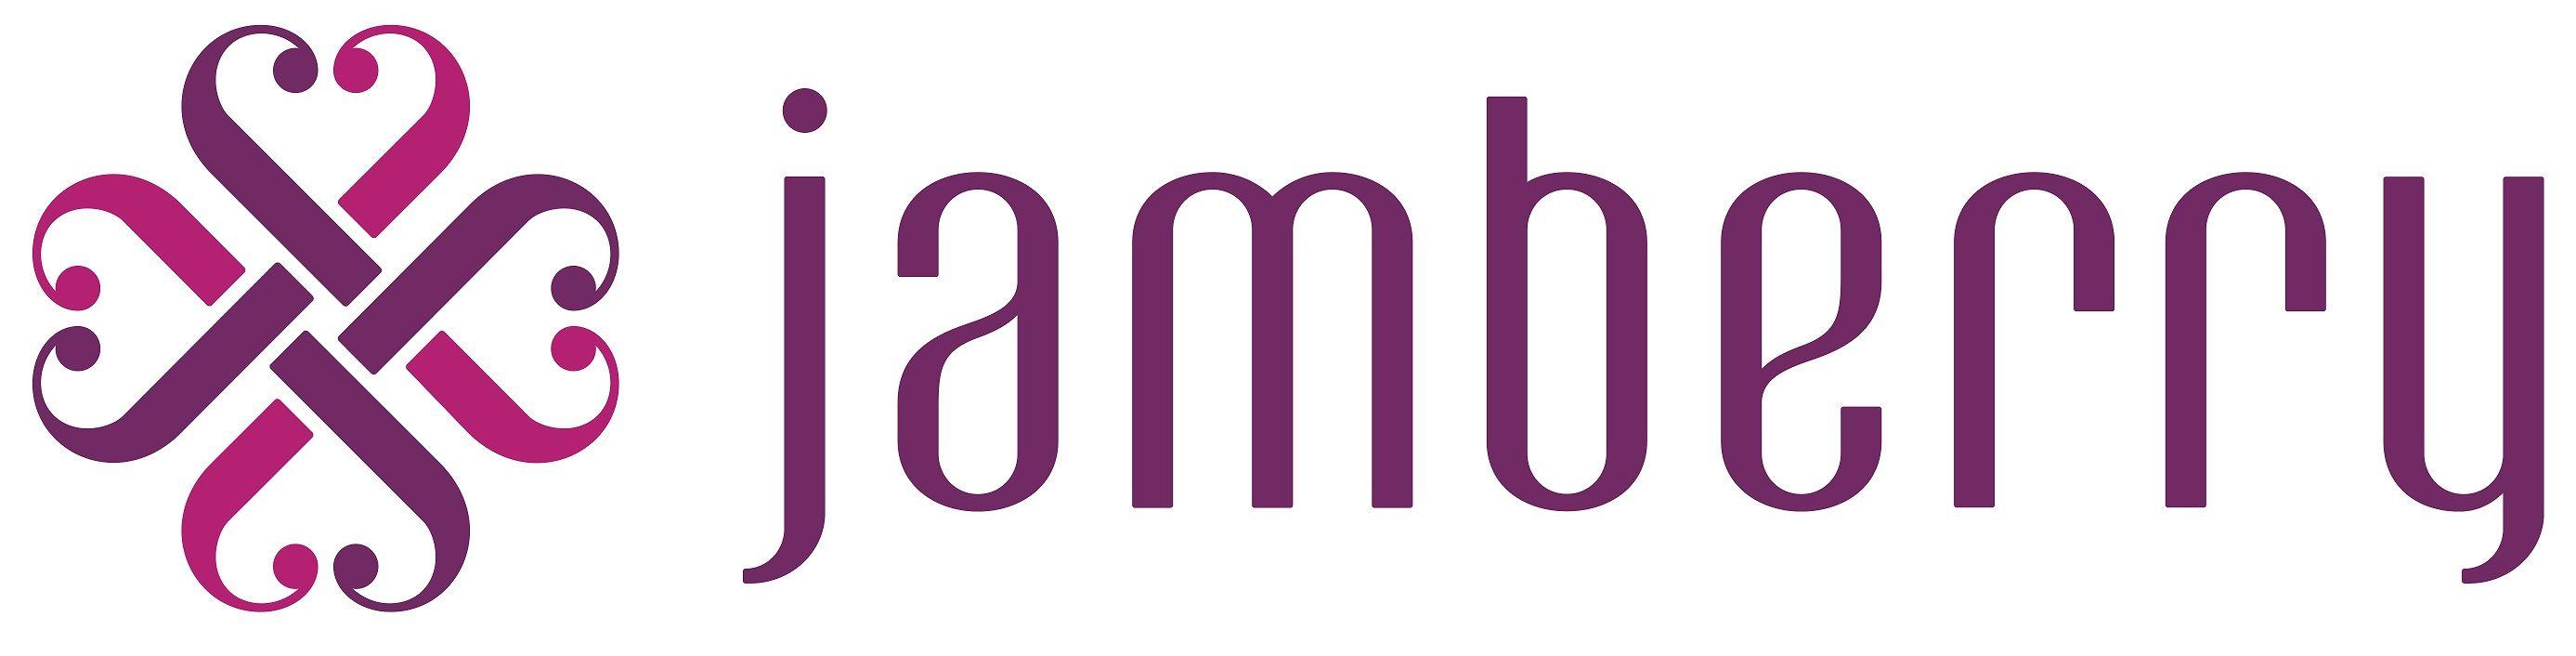 Purple Jamberry Logo - Jamberry Logo | Jamberry | Pinterest | Holiday gift guide, Jamberry ...